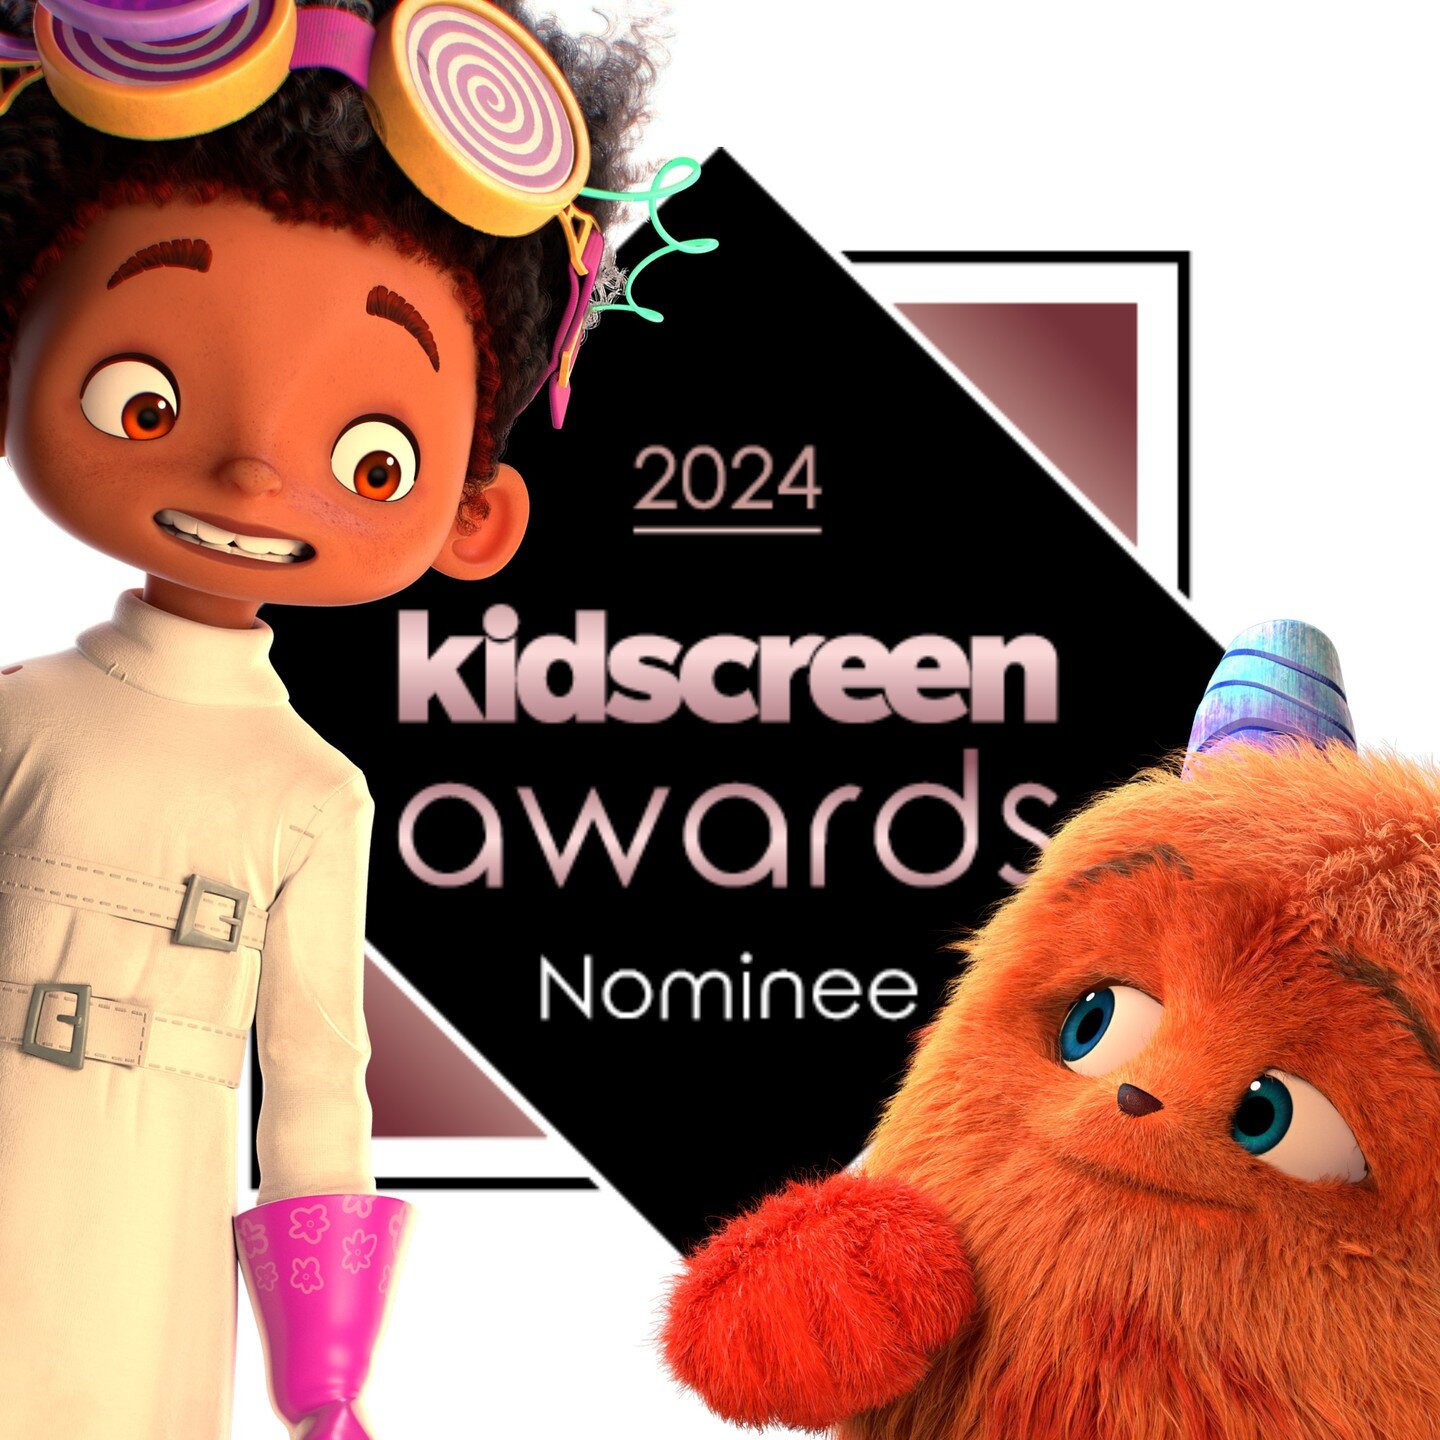 Good luck and congratulations to all the nominees at the @kidscreen Awards in San Diego this evening! We're thrilled to be nominated for BEST ONE OFF, SPECIAL OR TV MOVIE alongside some amazing projects. #KidscreenAwards @skyireland @skytv
@ced_irela